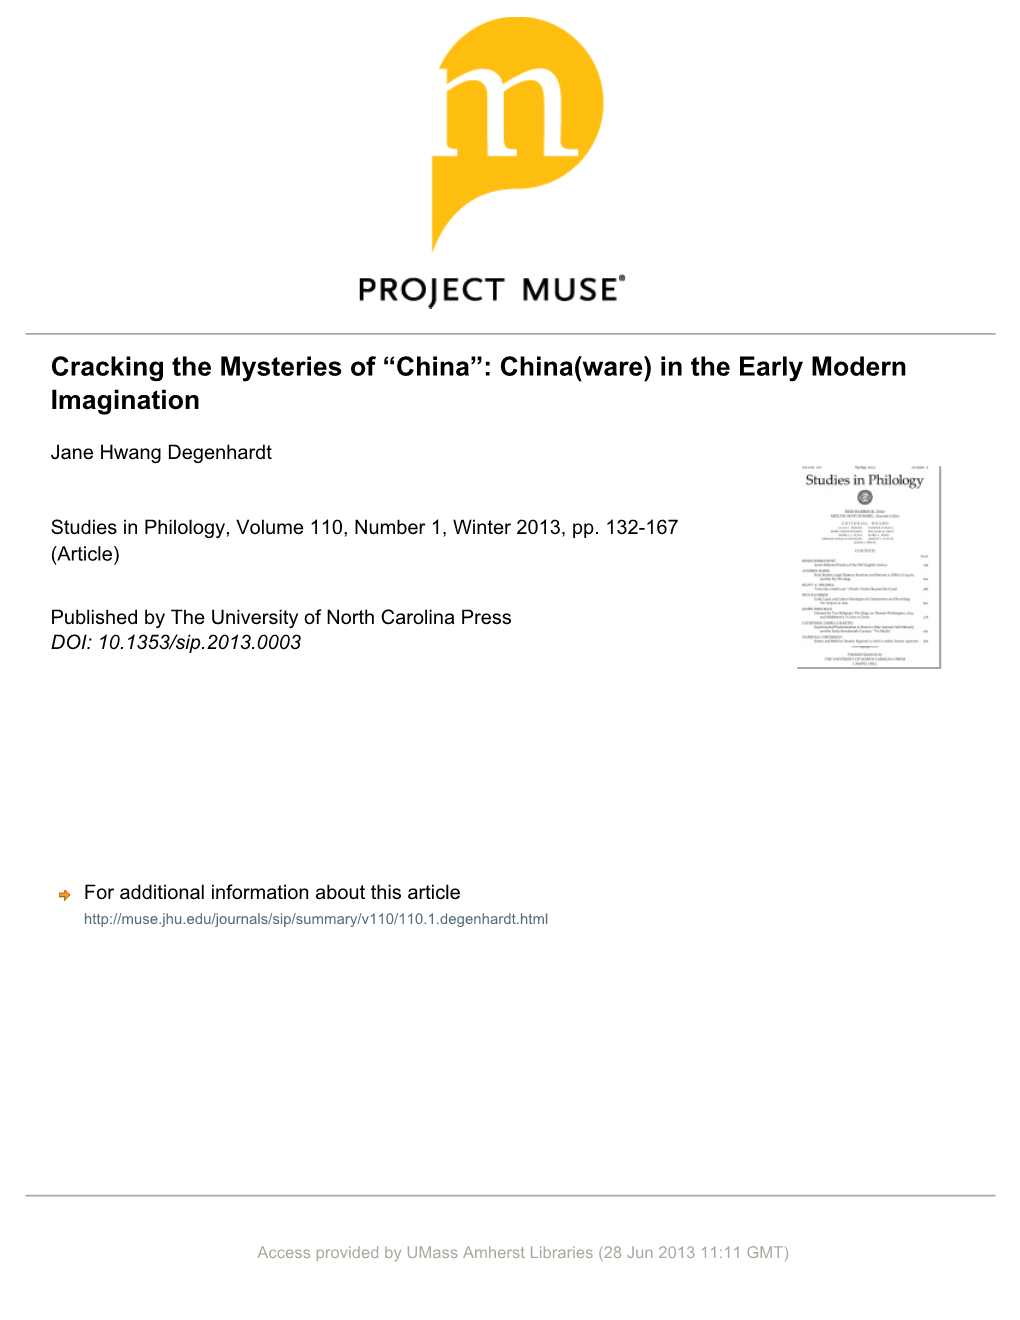 Cracking the Mysteries of “China”: China(Ware) in the Early Modern Imagination